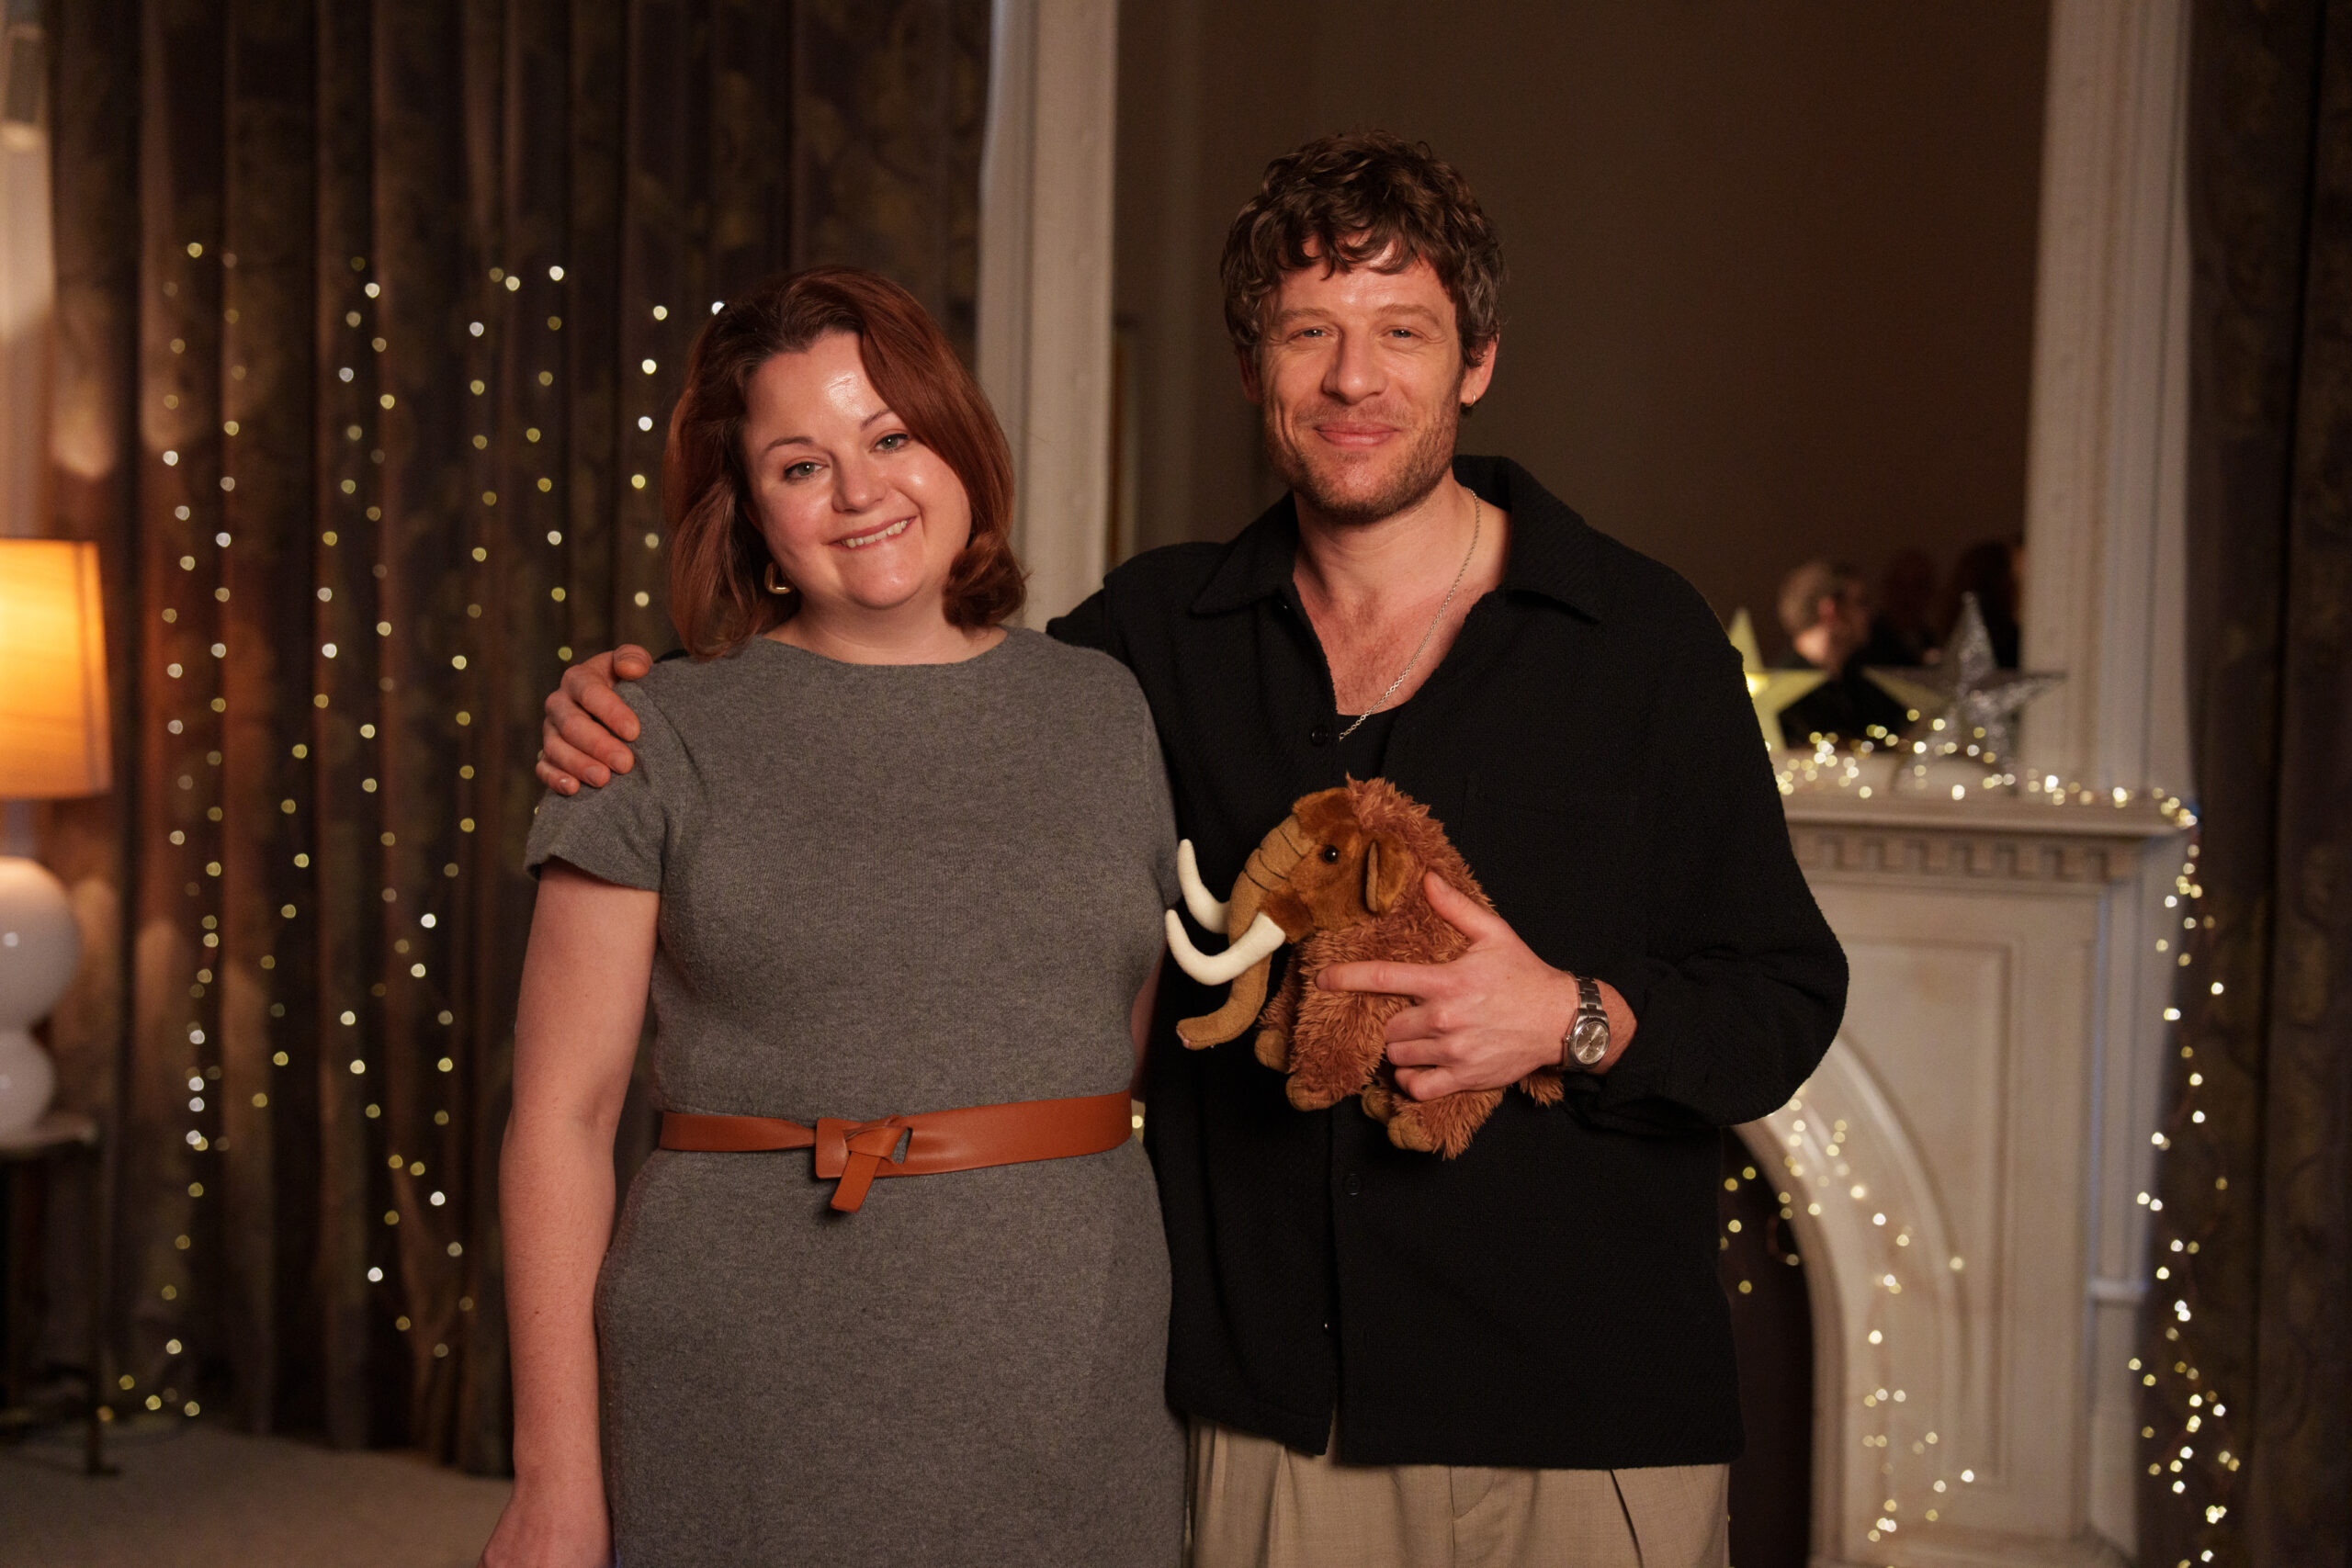 How to Manage A Mammoth read by James Norton on CBeebies